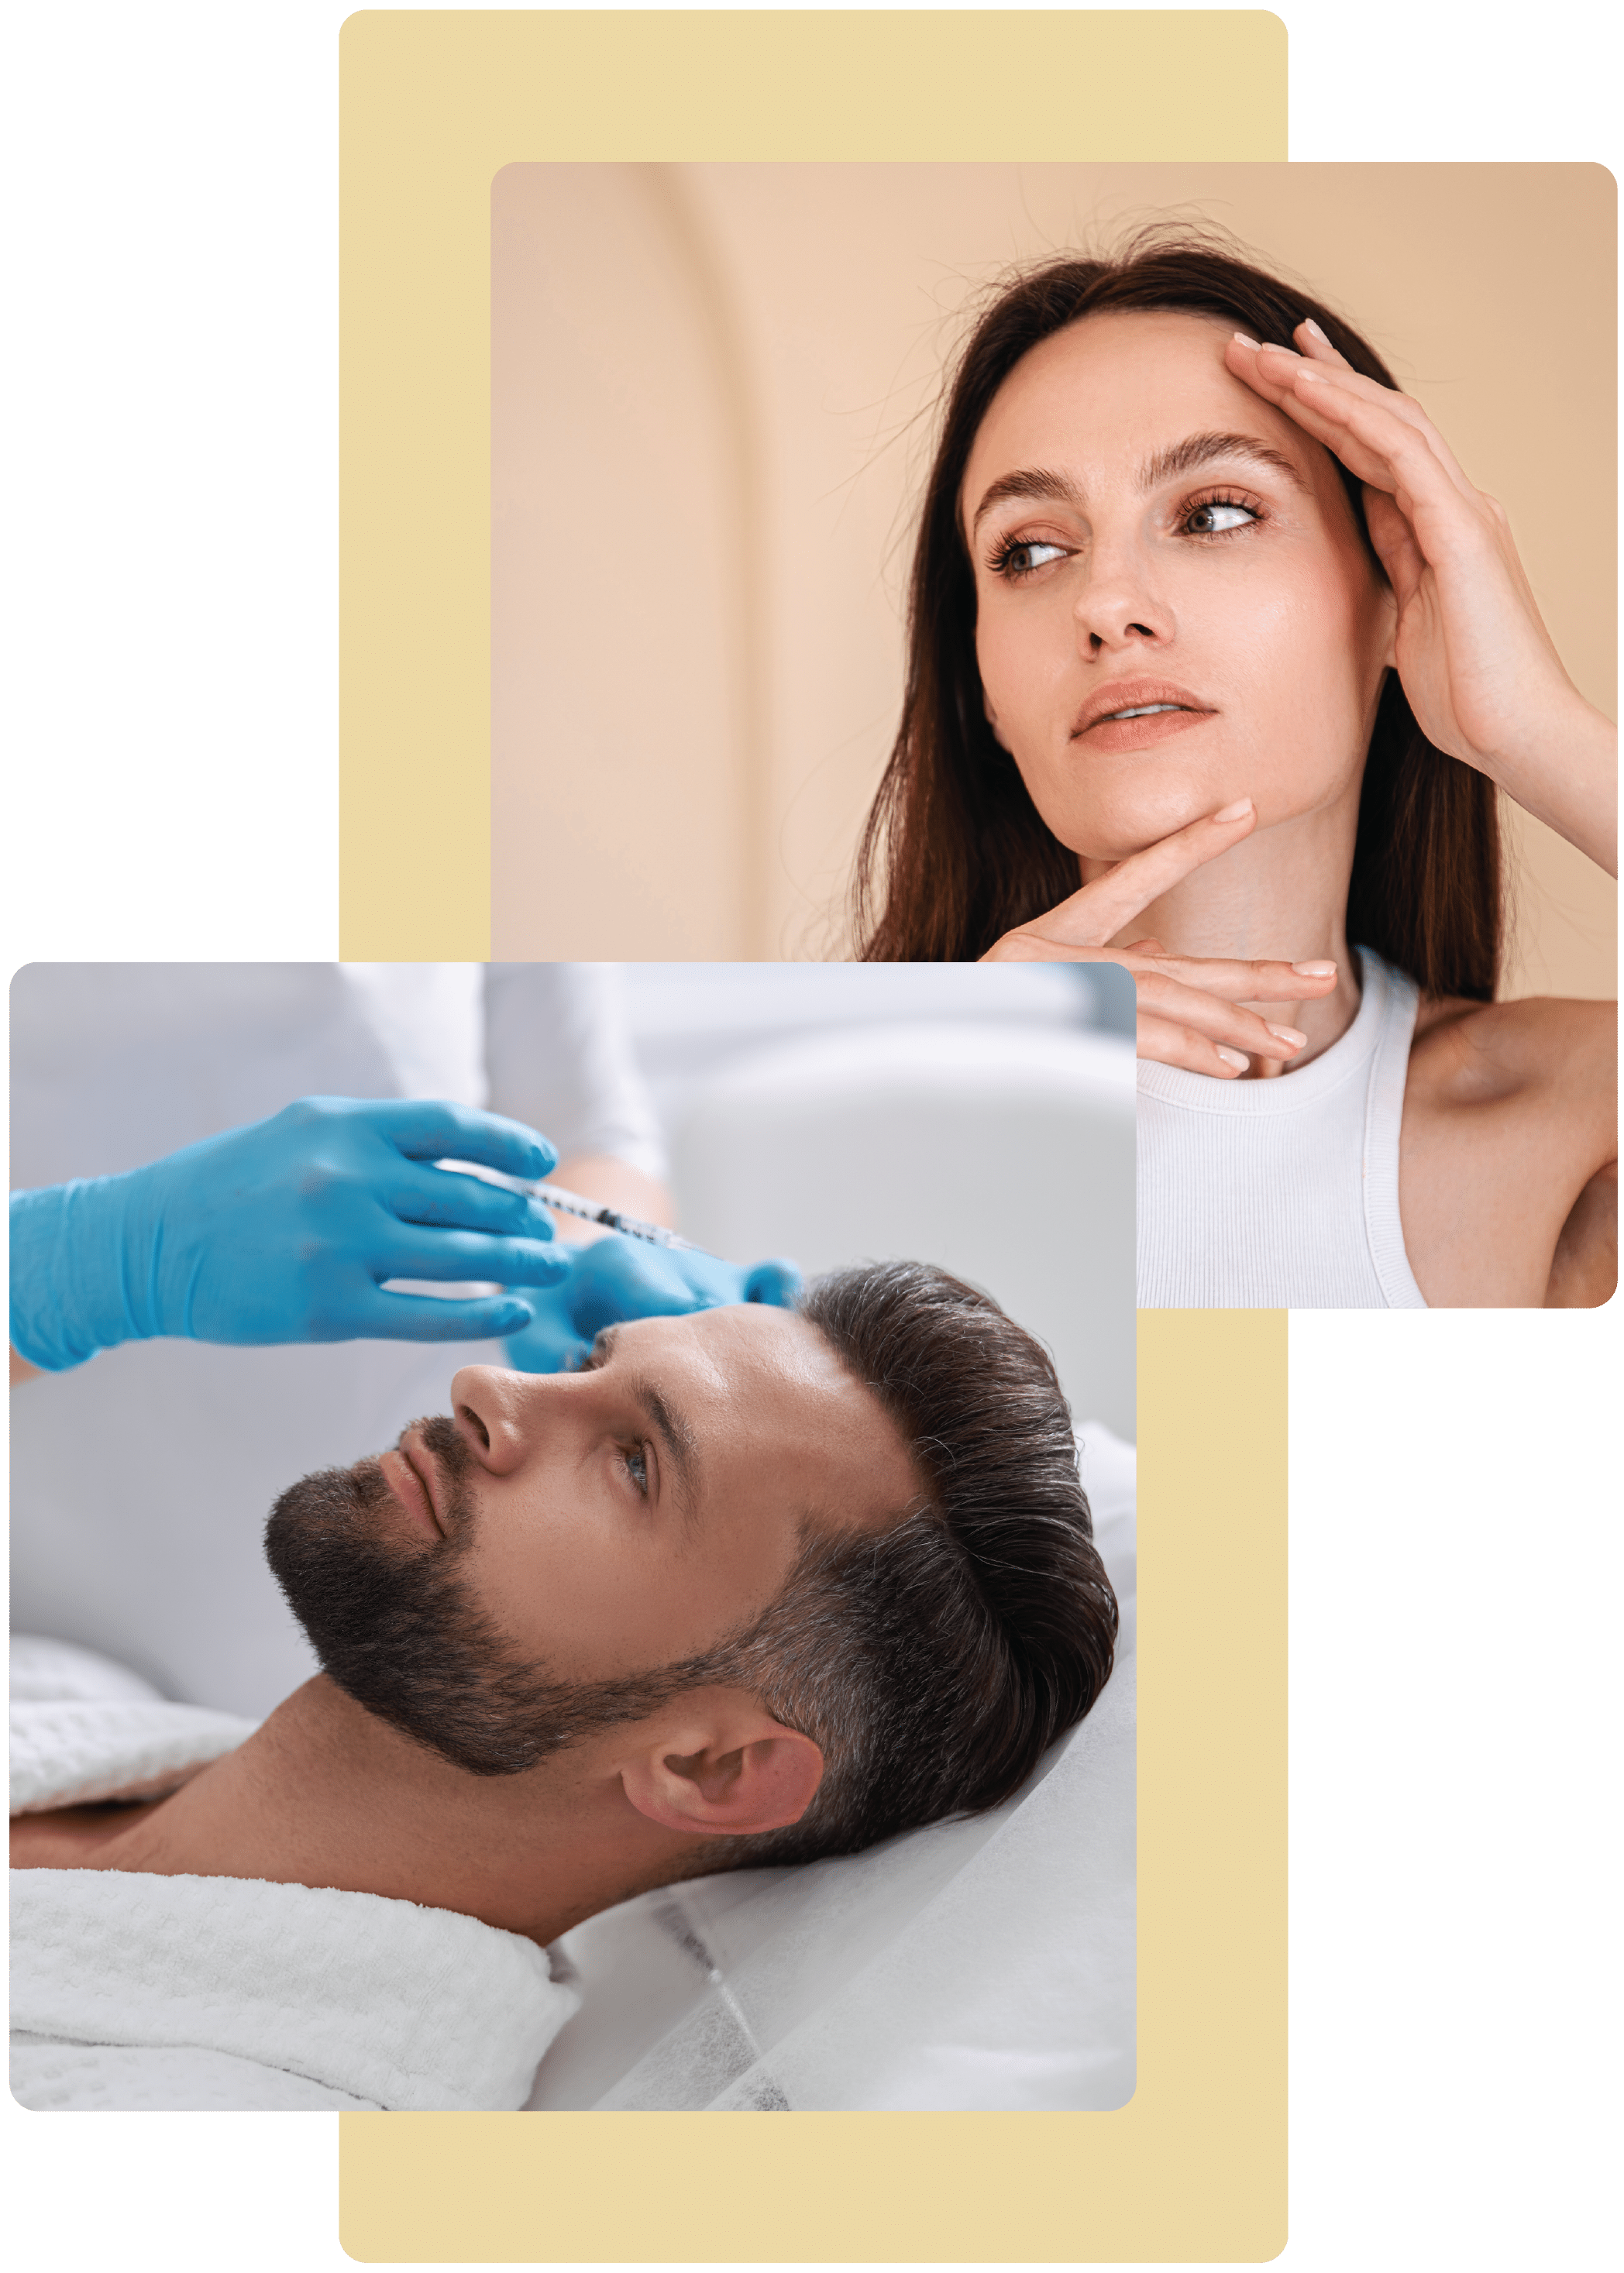 facial aesthetic injectibles at chronos body health and wellness med spa